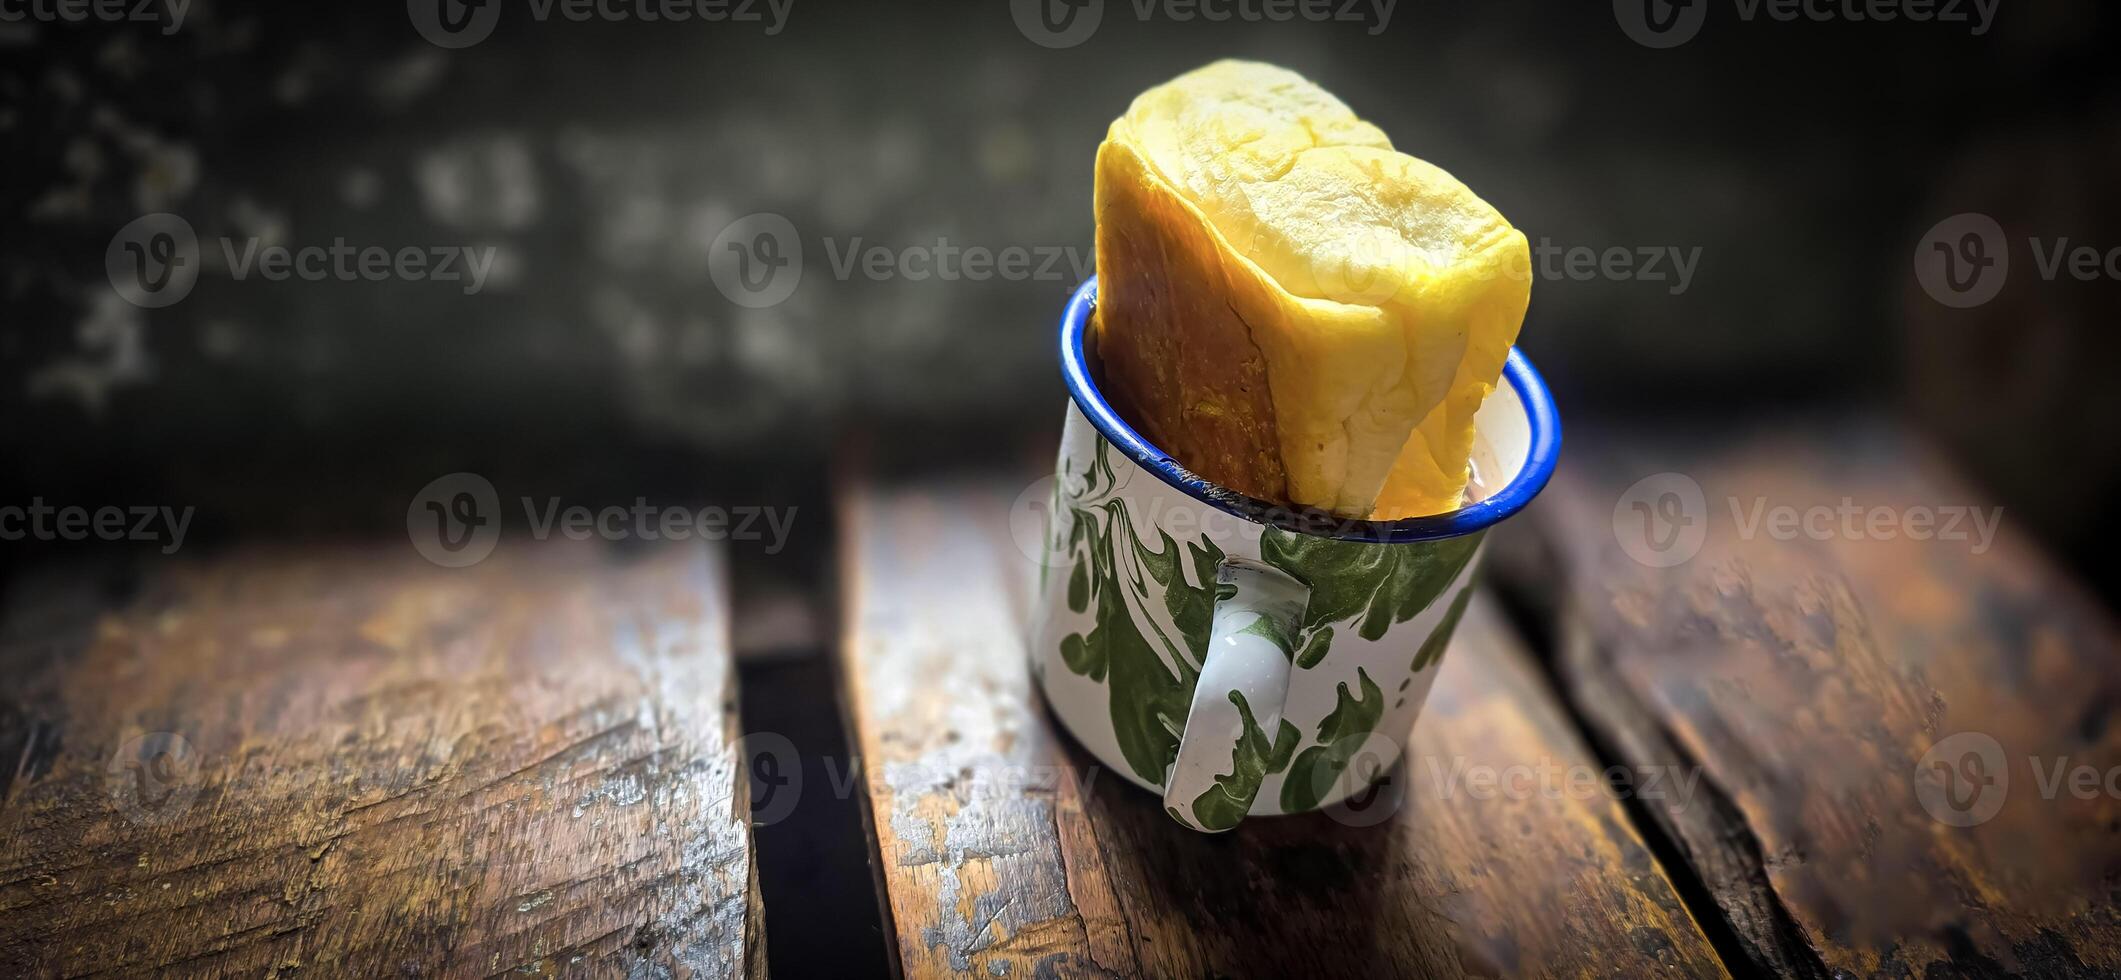 Ice chocolate drink on a vintage Indonesian iron mug with random green pattern called Blirik cup or cangkir Blirik on bokeh background along with chocolate filling bread photo